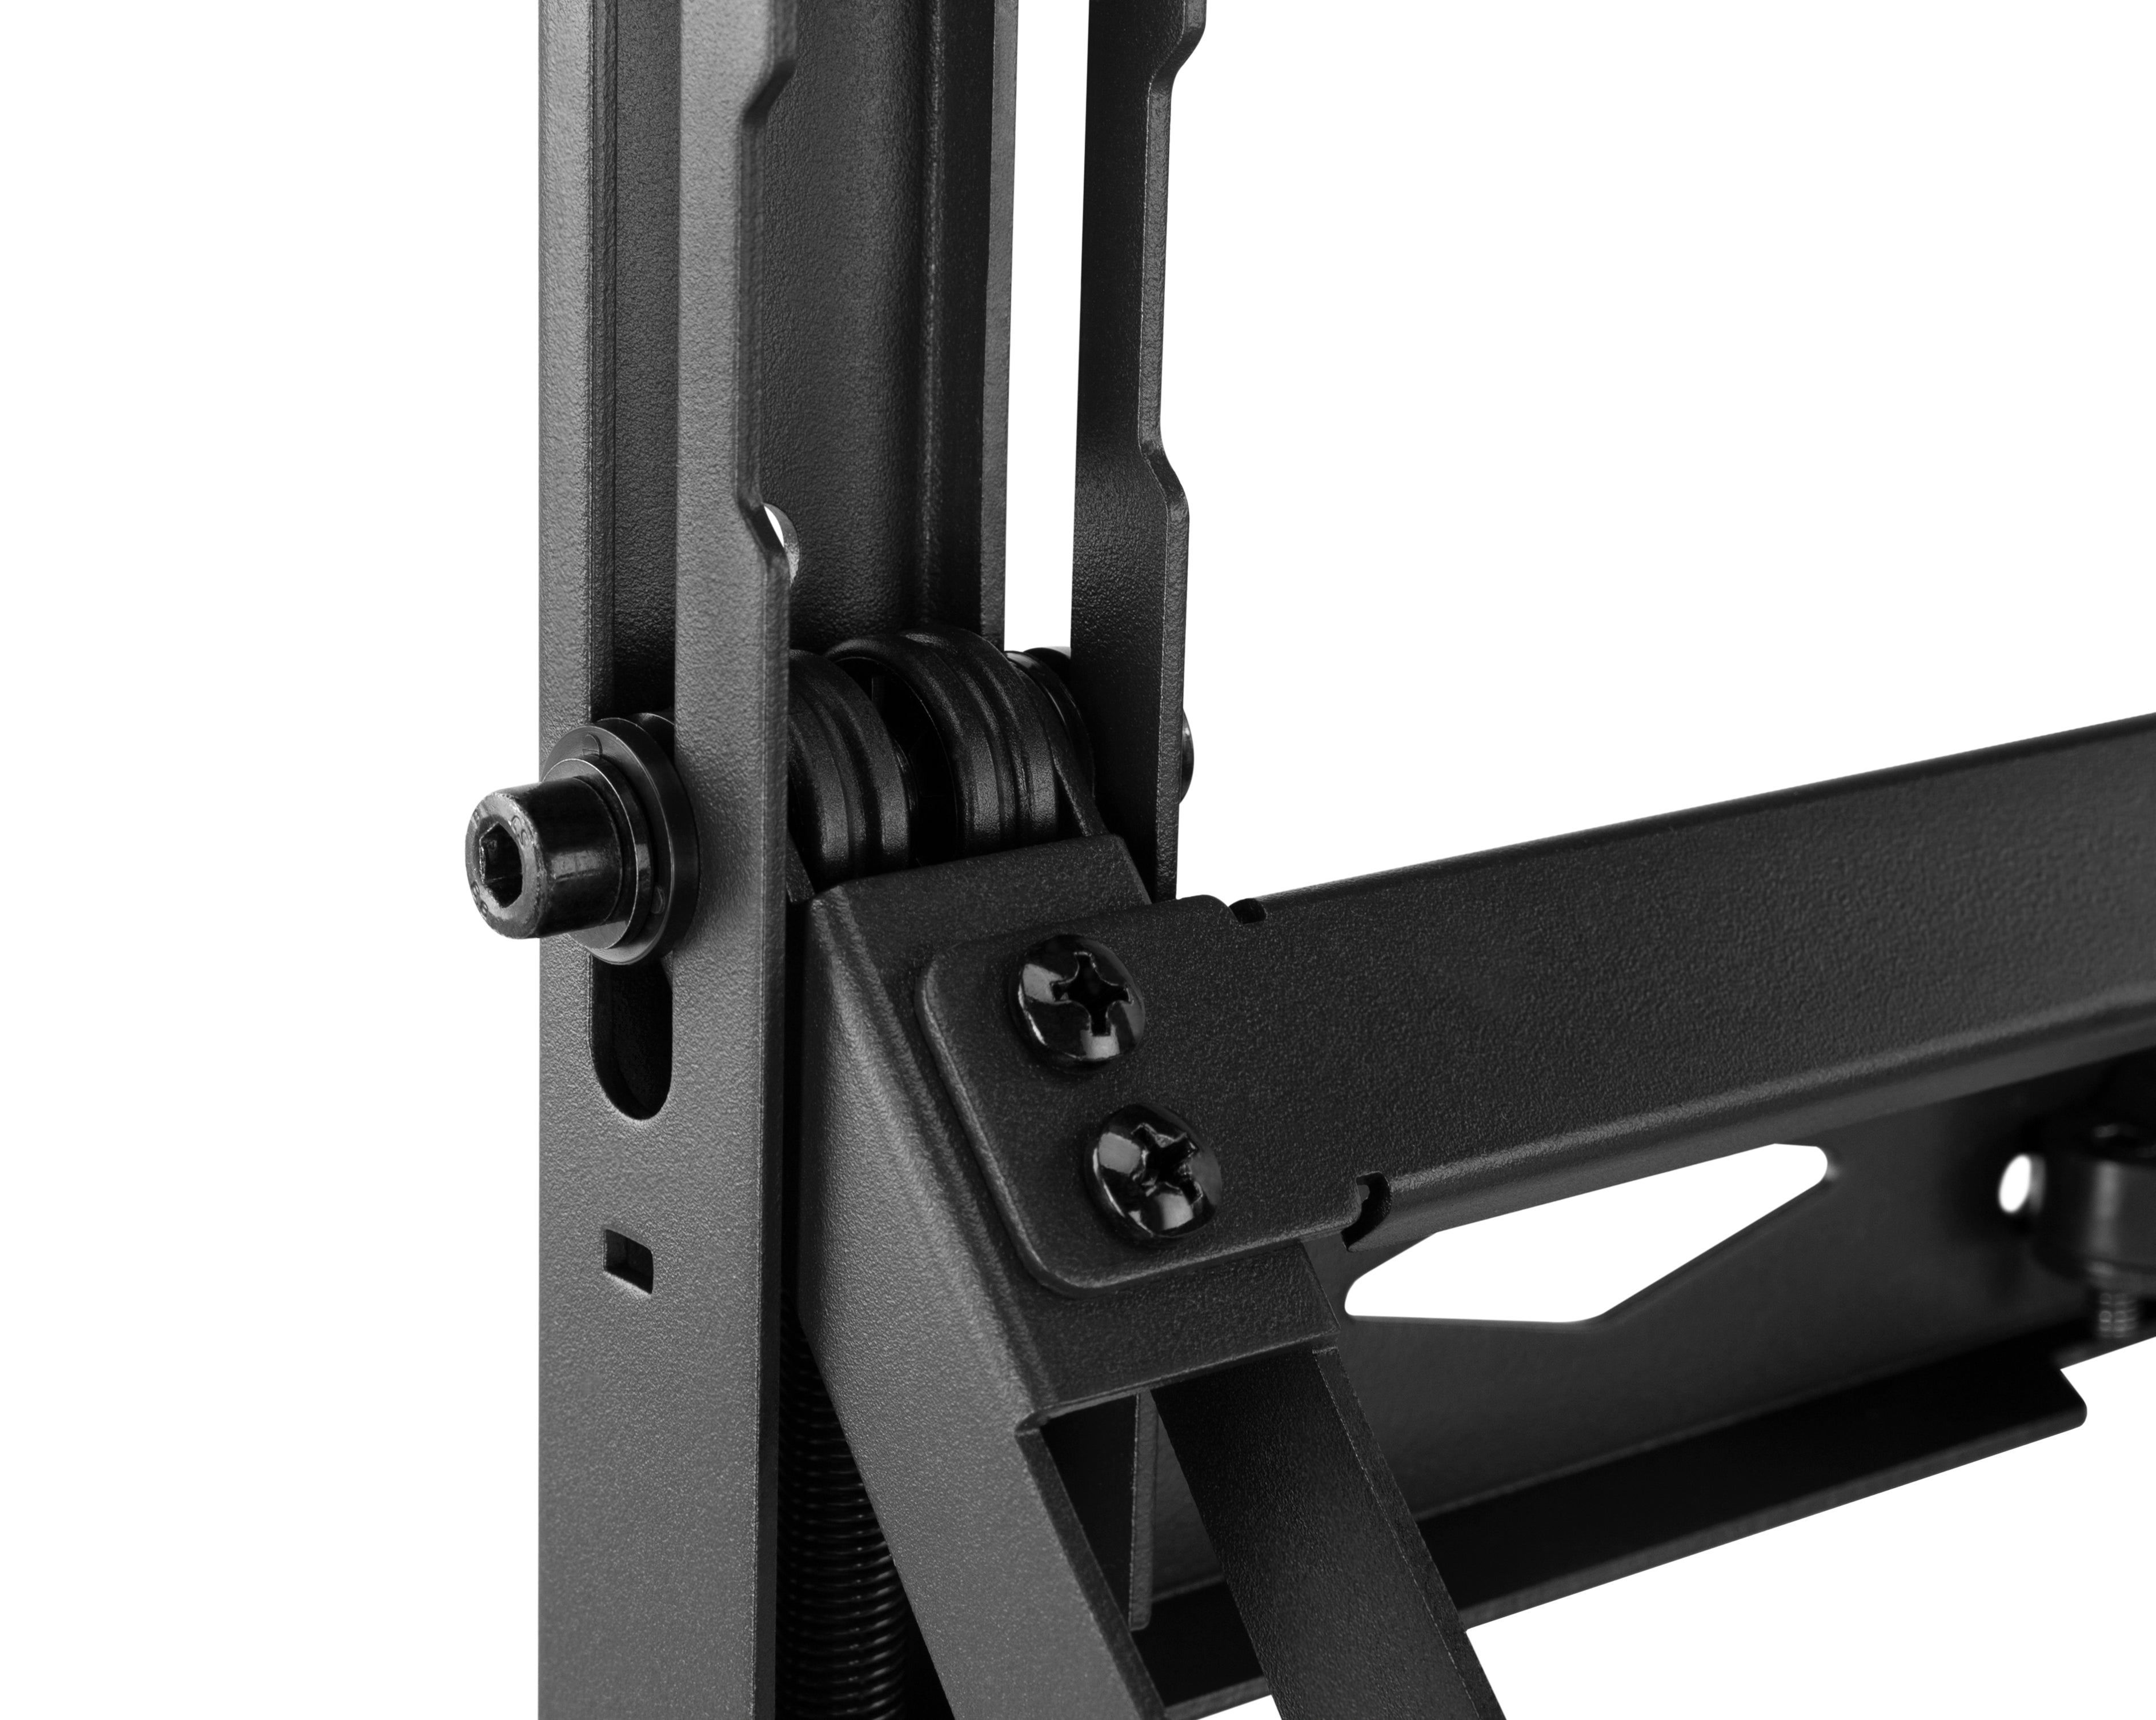 Push-In Pop-Out Video Wall Mount with X-, Y-, Z- Axis Micro-Adjustability - New for 2023!